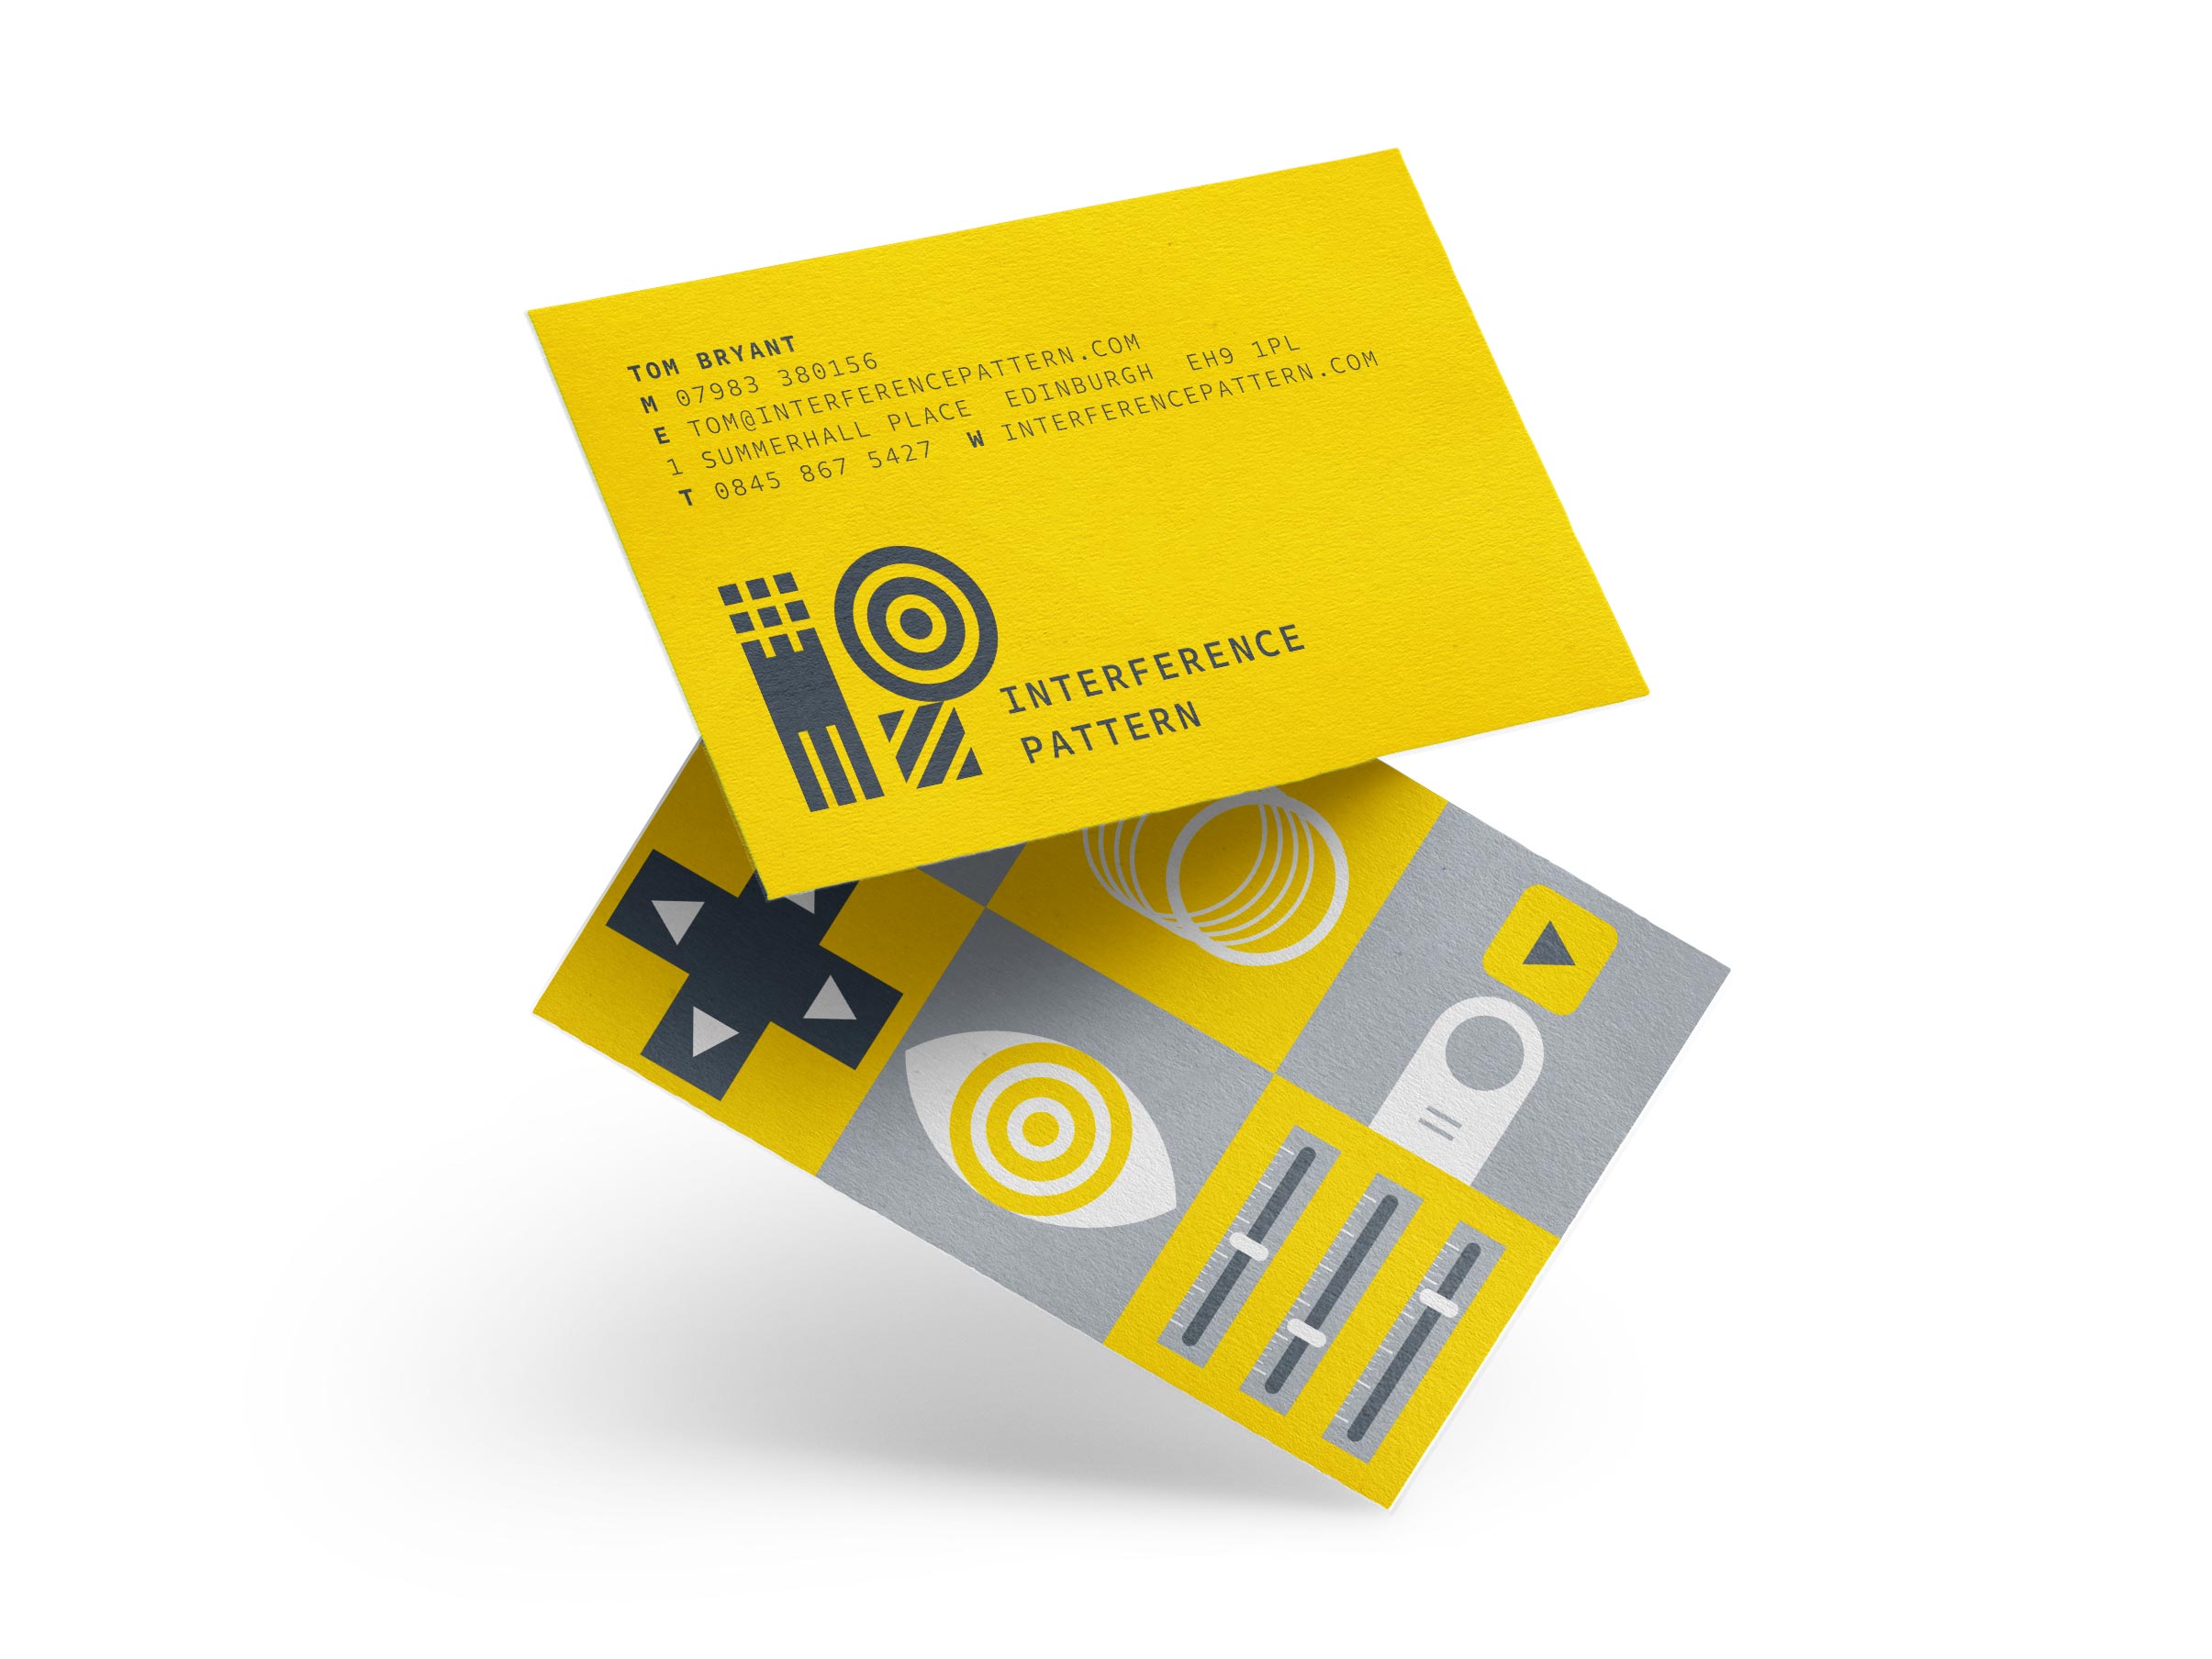 Interference Pattern animation studio business cards designed by Monumentum Brands